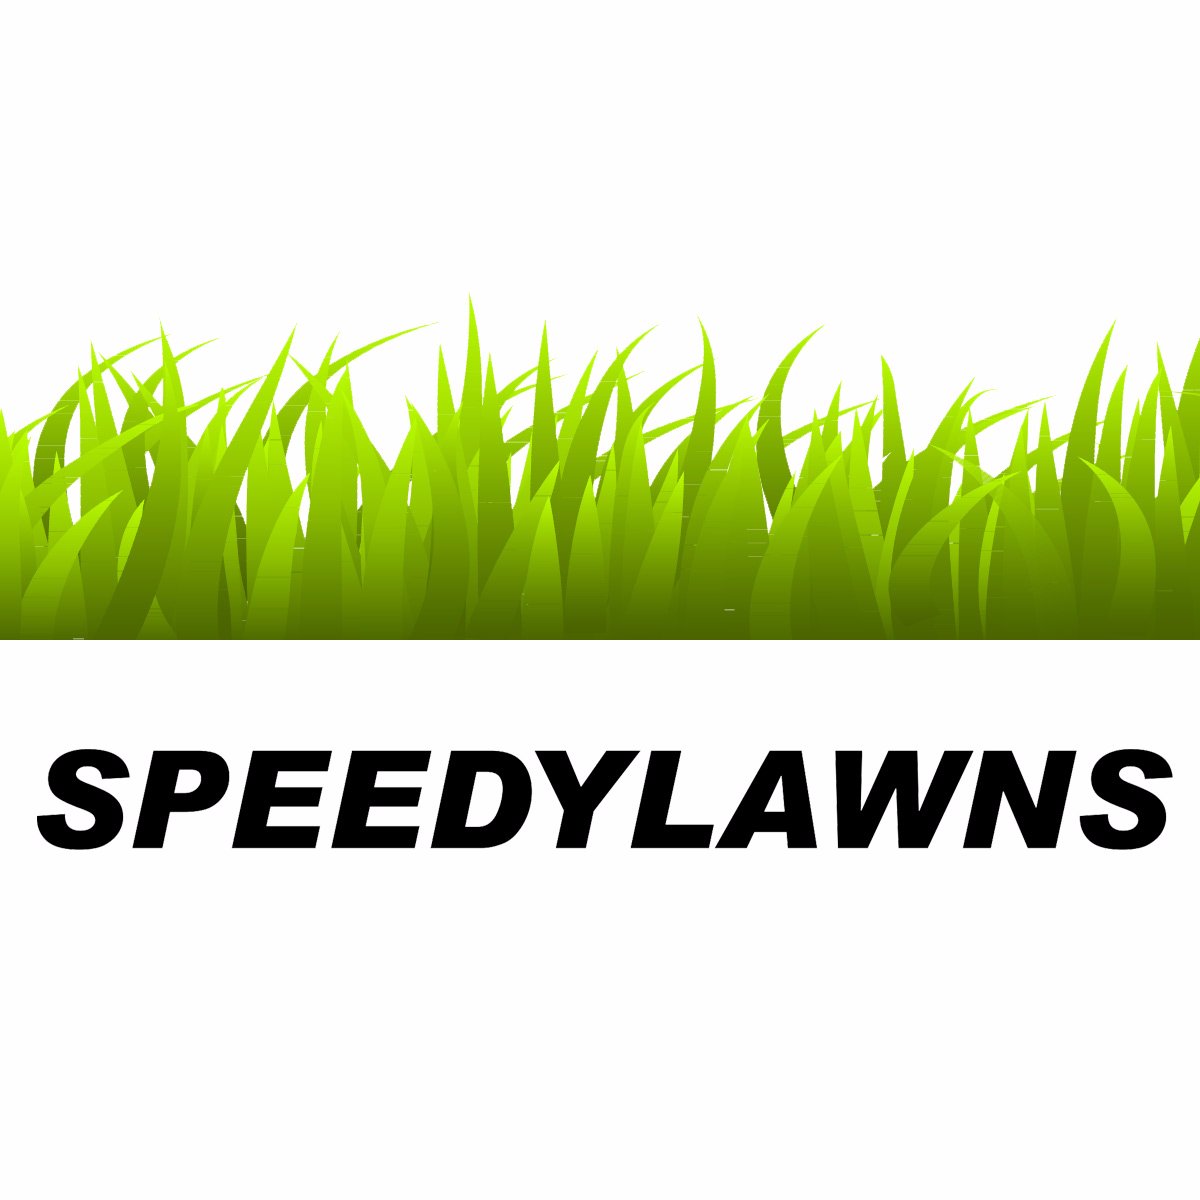 Fast lawn grass, alternative to laying turf/sod lawn. Ground-works for site & soil prep. Fencing & drainage services. Covering Wairarapa & Wellington.